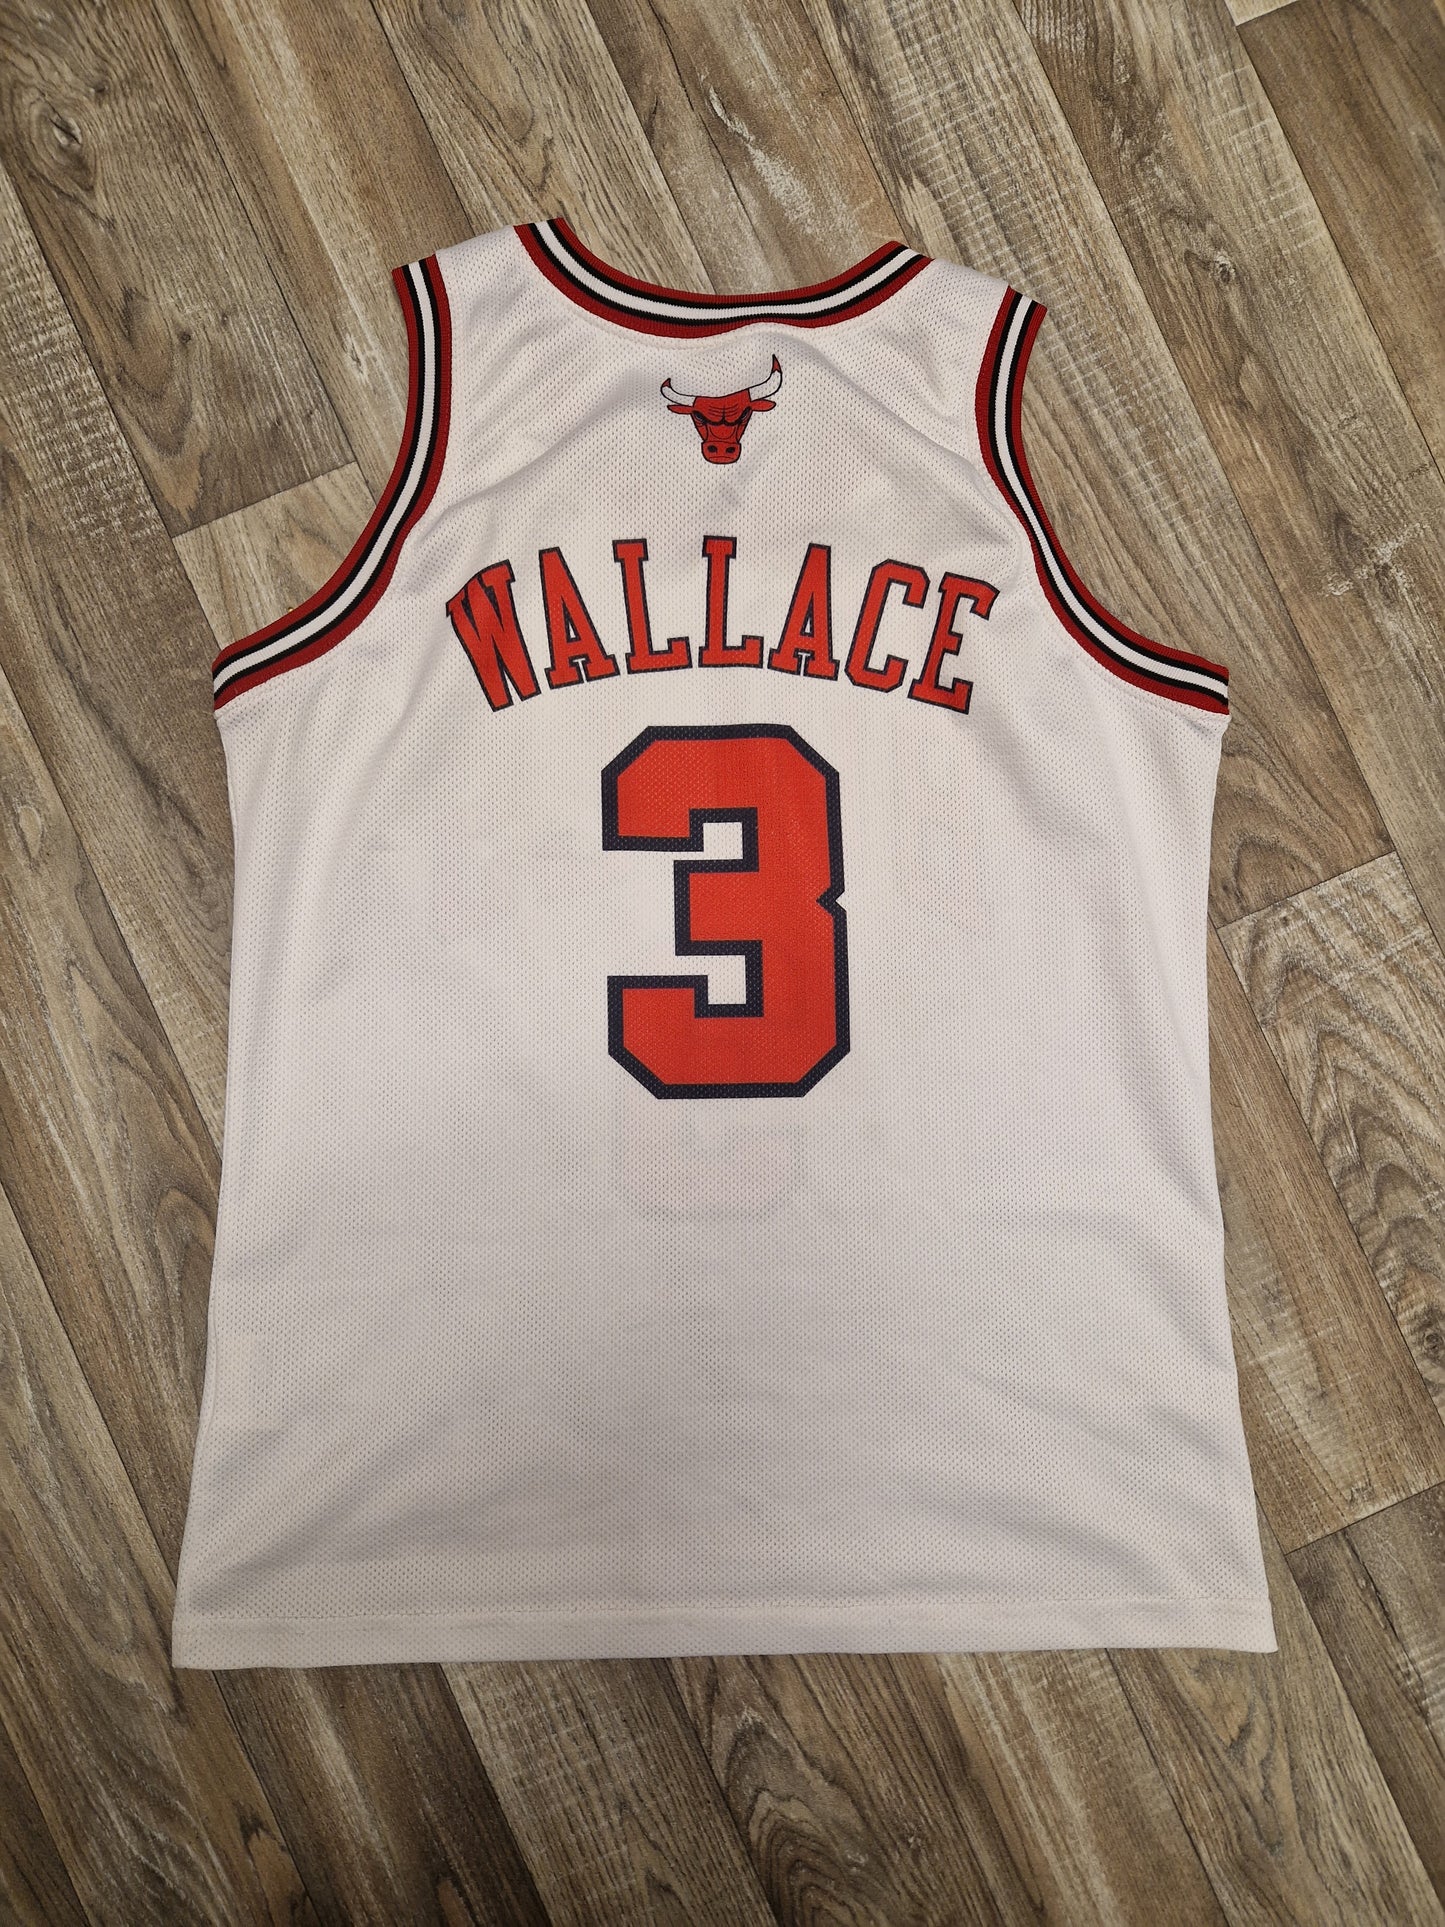 Ben Wallace Chicago Bulls Jersey Size Small